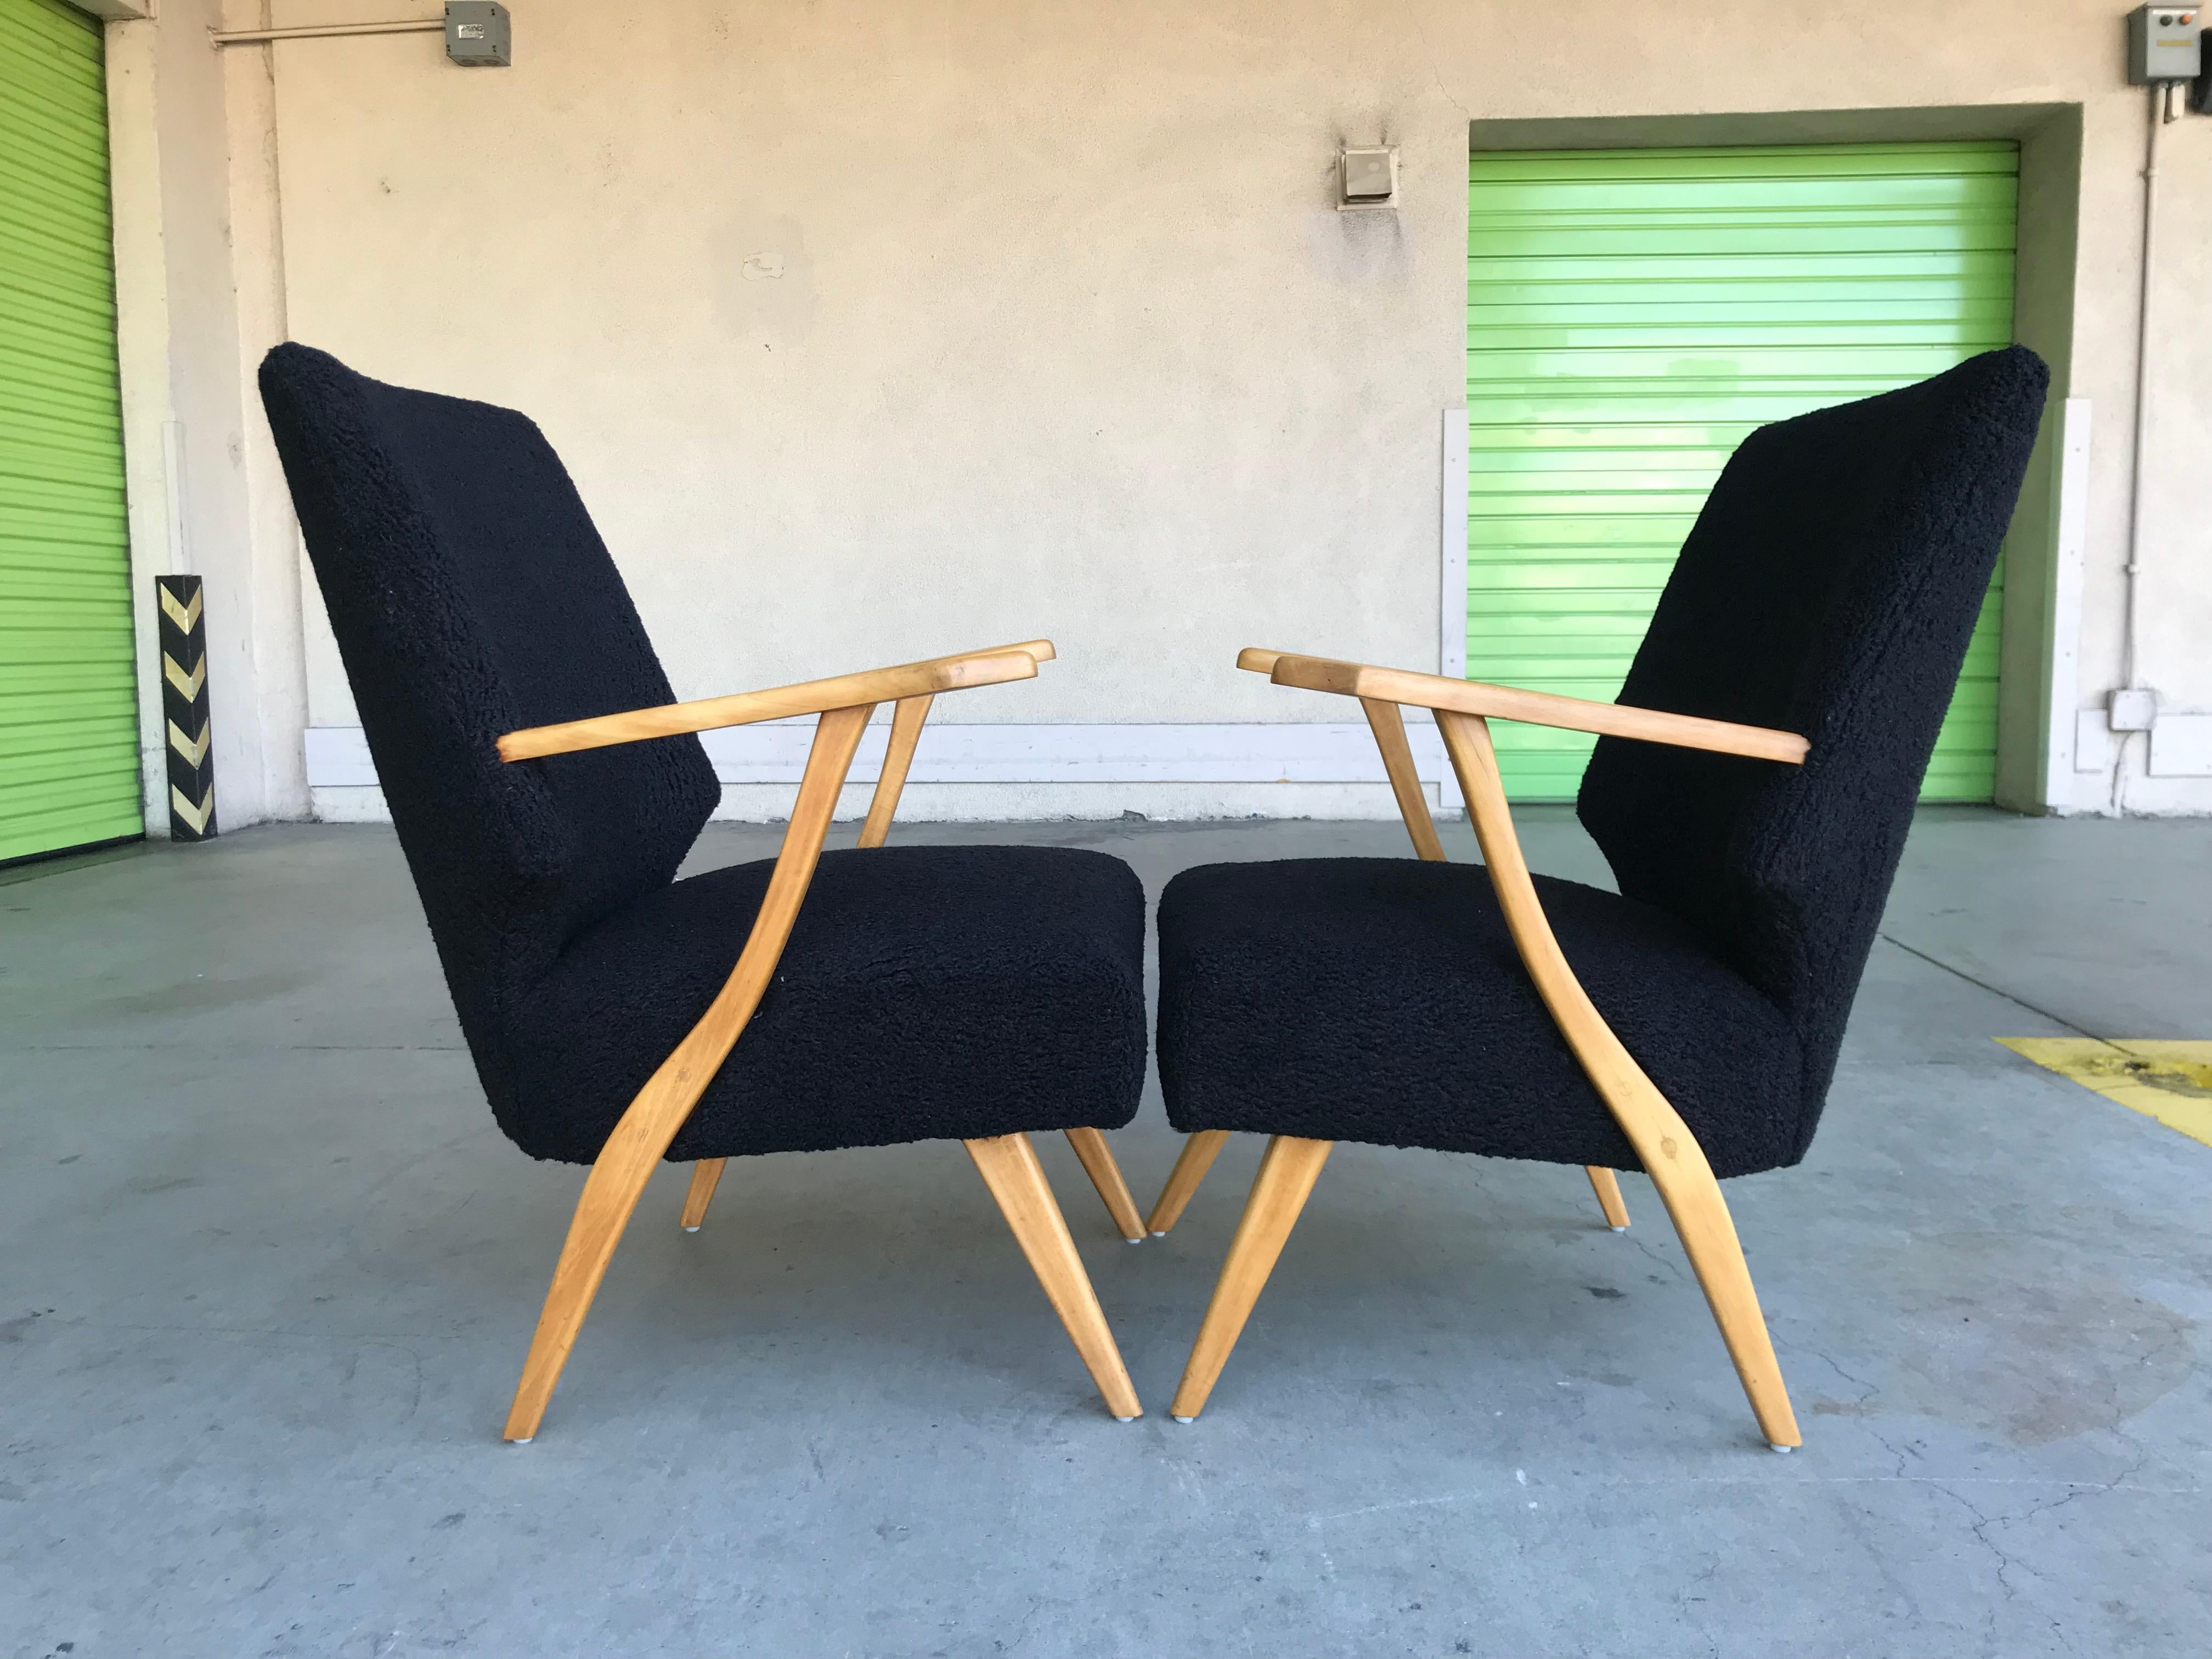 Handsome pair of lounge chairs.
Wood construction with nice sculptural arm / leg base, appears to be birch wood.
Restored with new black boucle upholstery.
Sits comfortably with snug high-backrest. 
Solid, sturdy and stout.
Presents well for any